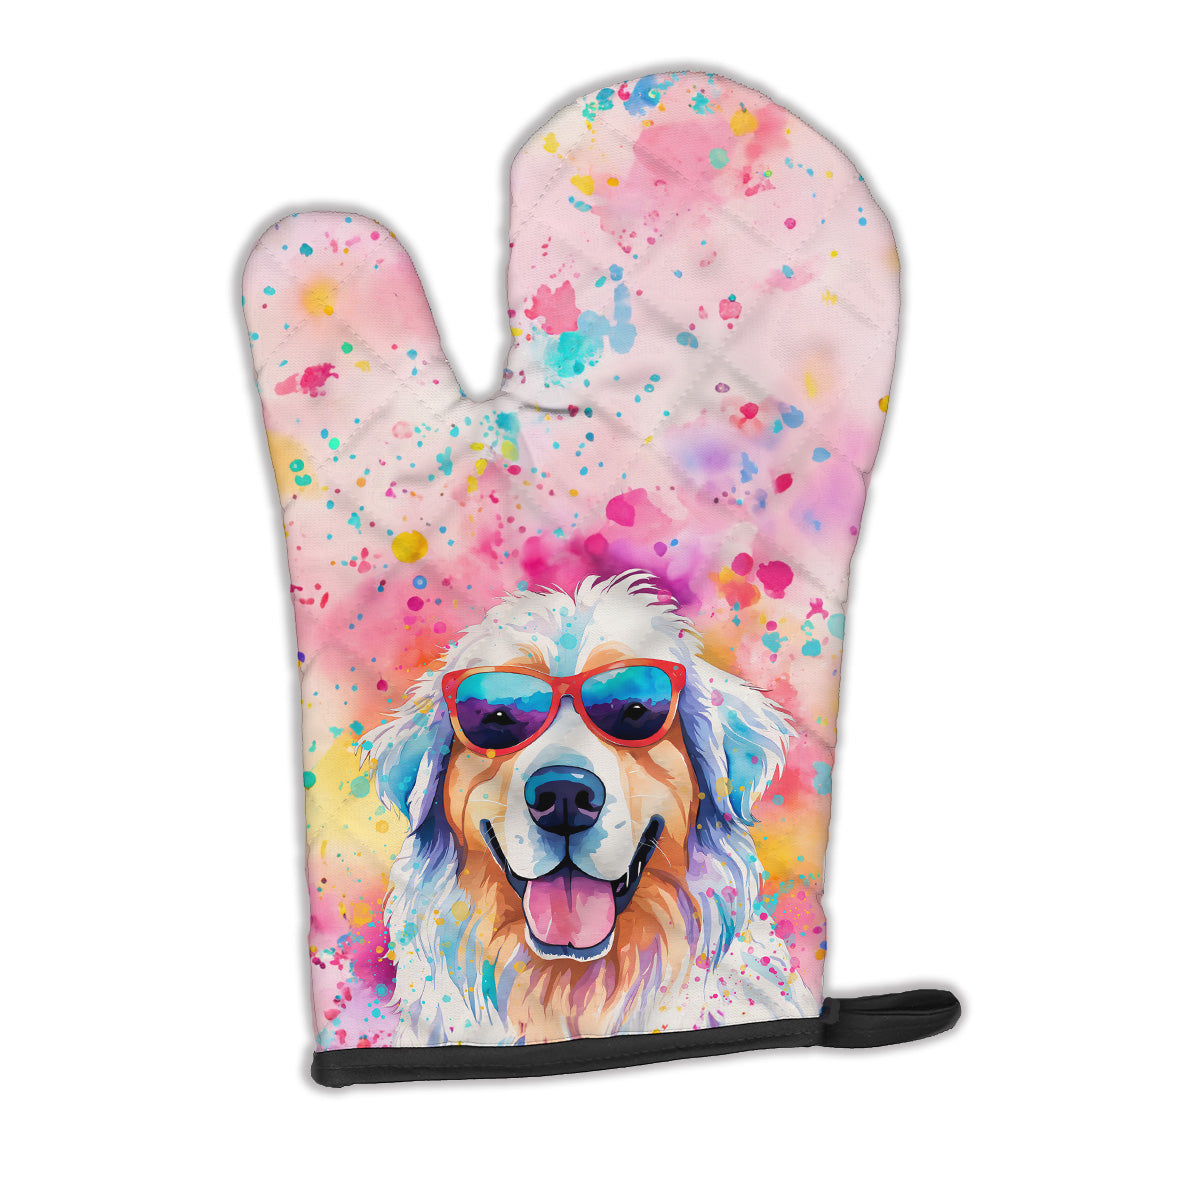 Buy this Great Pyrenees Hippie Dawg Oven Mitt